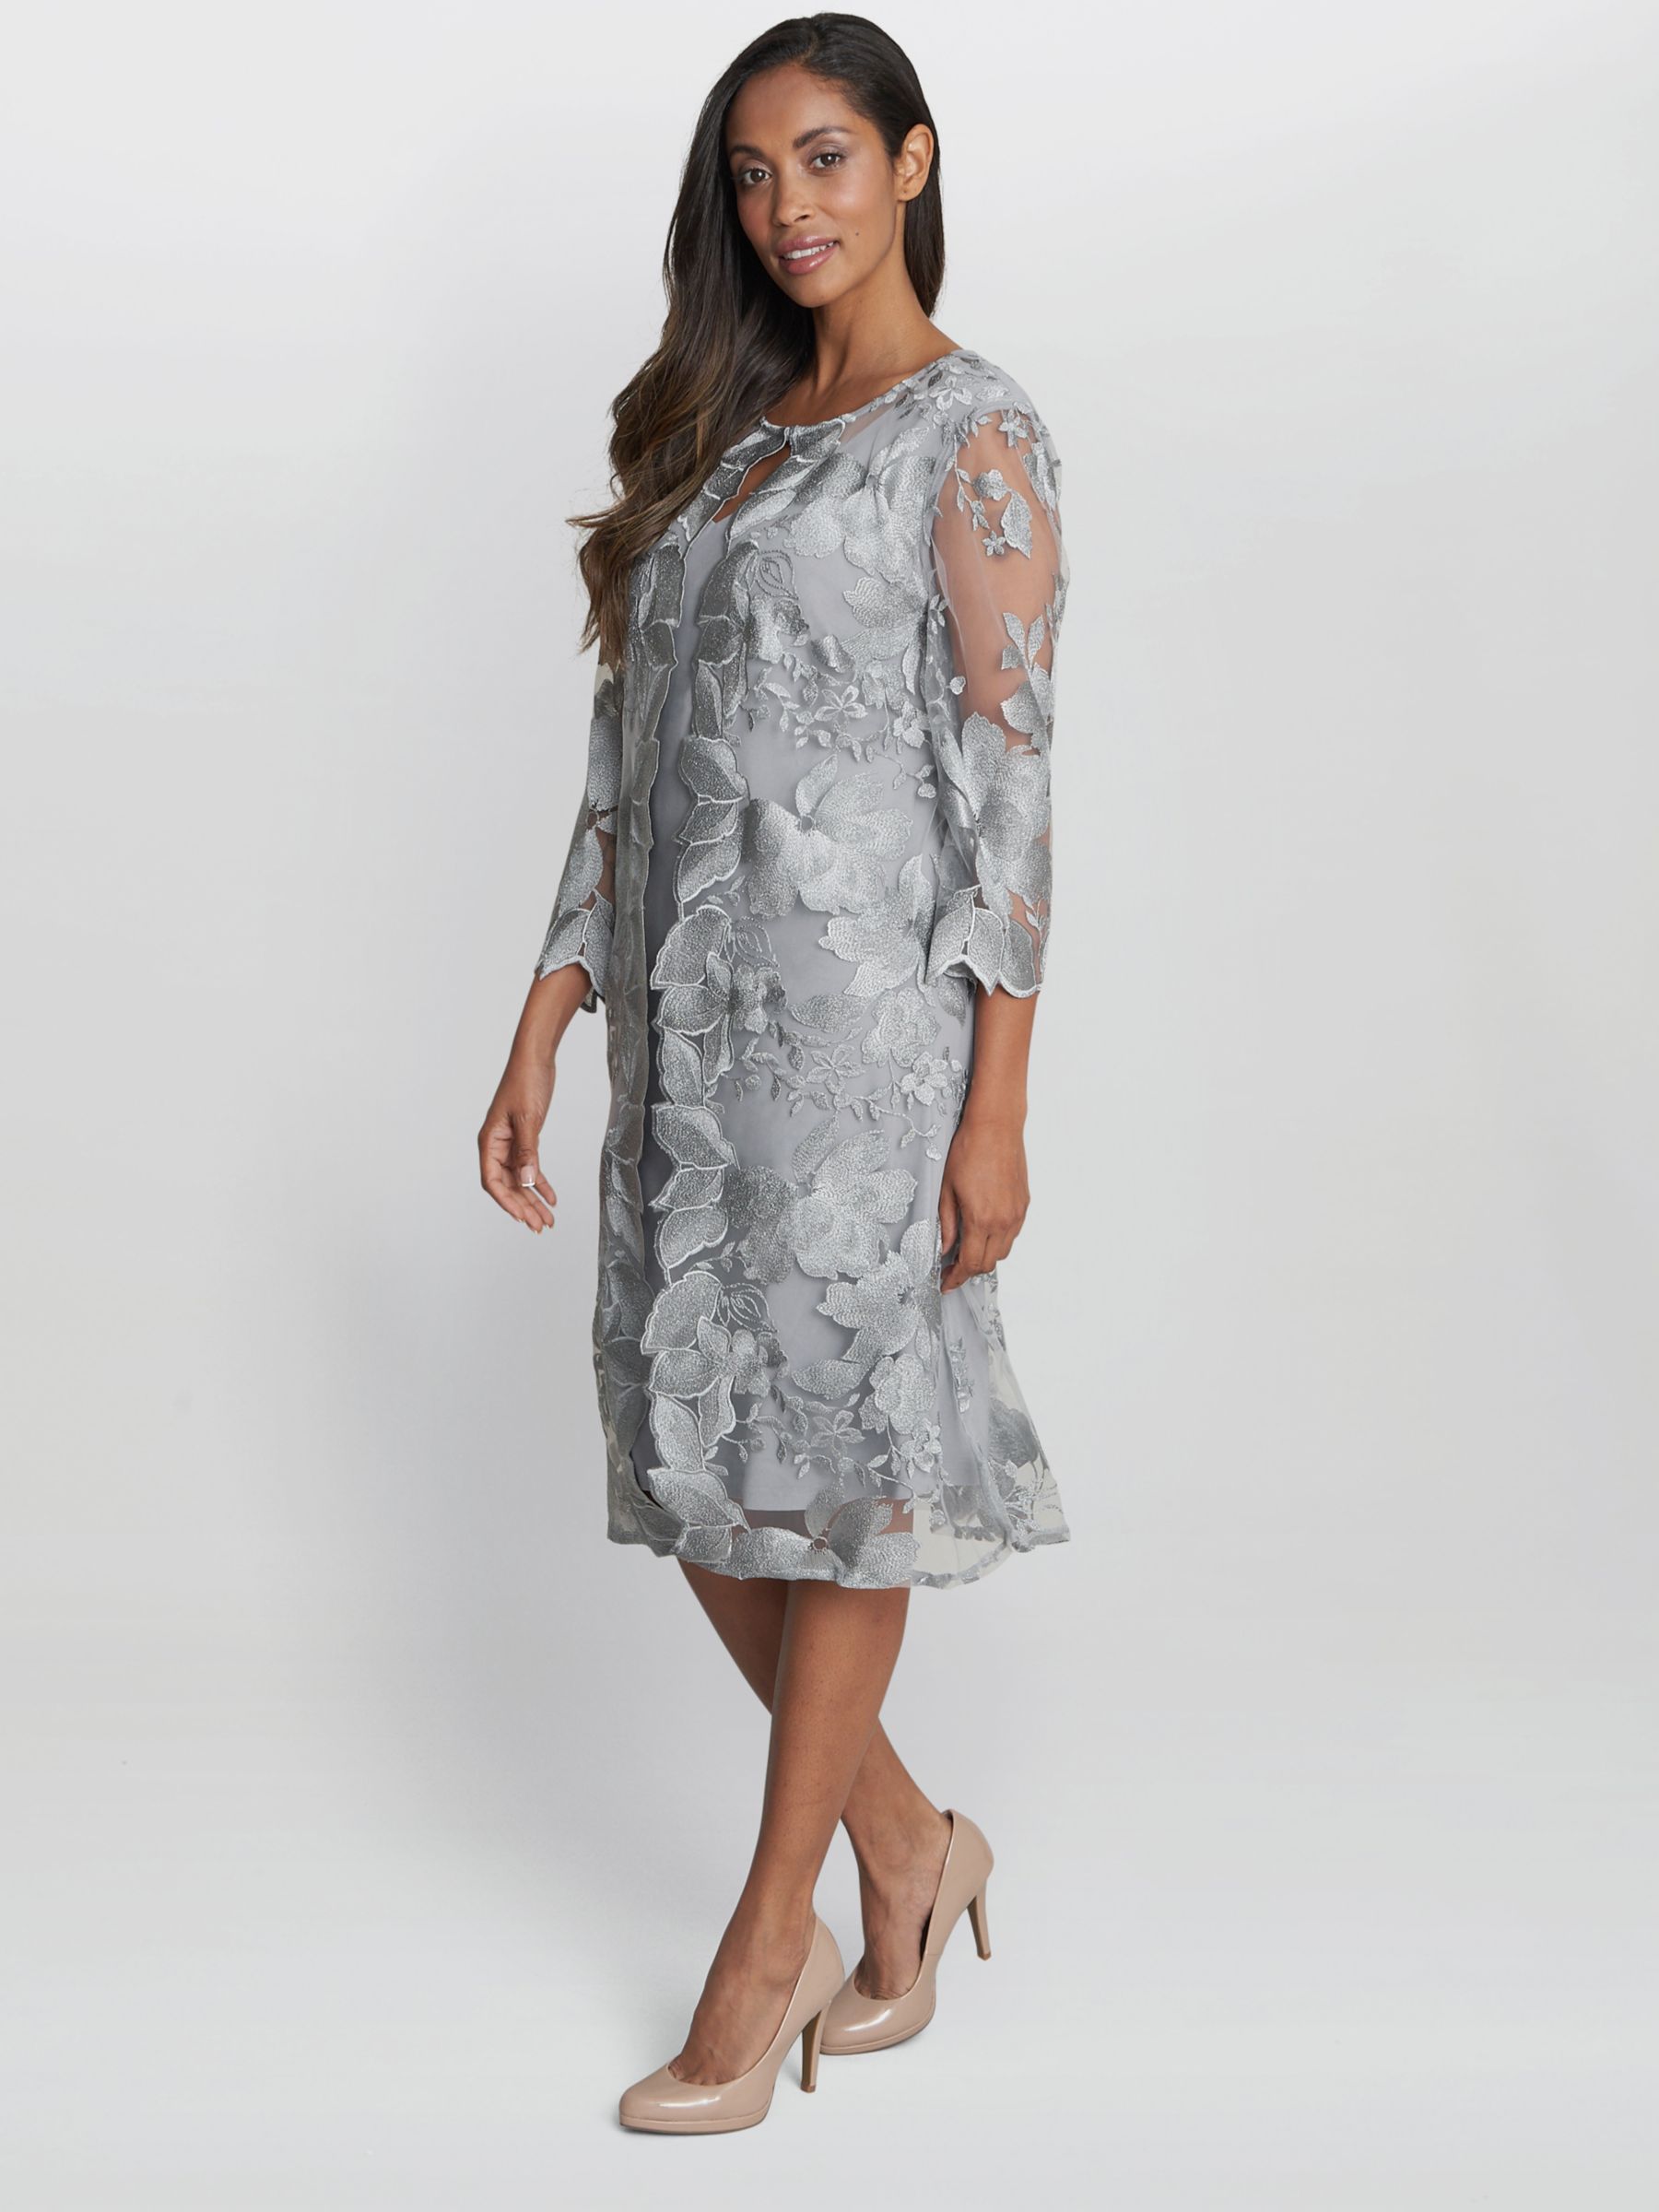 Buy Gina Bacconi Savoy Floral Embroidered Lace Mock Knee Length Dress Online at johnlewis.com